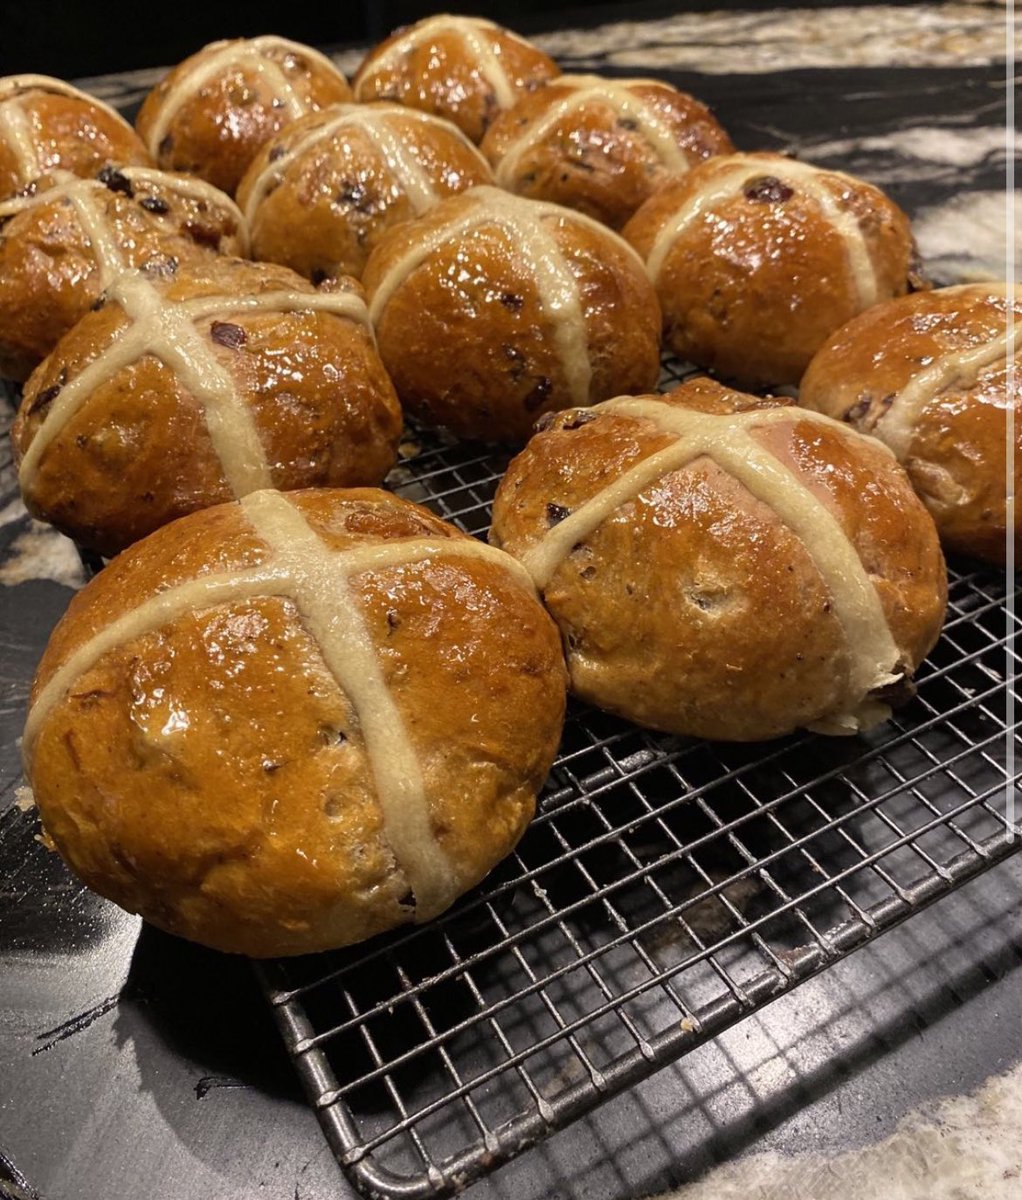 Is it time for the #breadmanwalking hotties to do their brief annual thing? I will put them on this weekend if the congregation wishes it.
#hotcrossbuns #easterbuns #easterbake #bunstagram #dublinfood #dublinfoodie #irishfoodblog